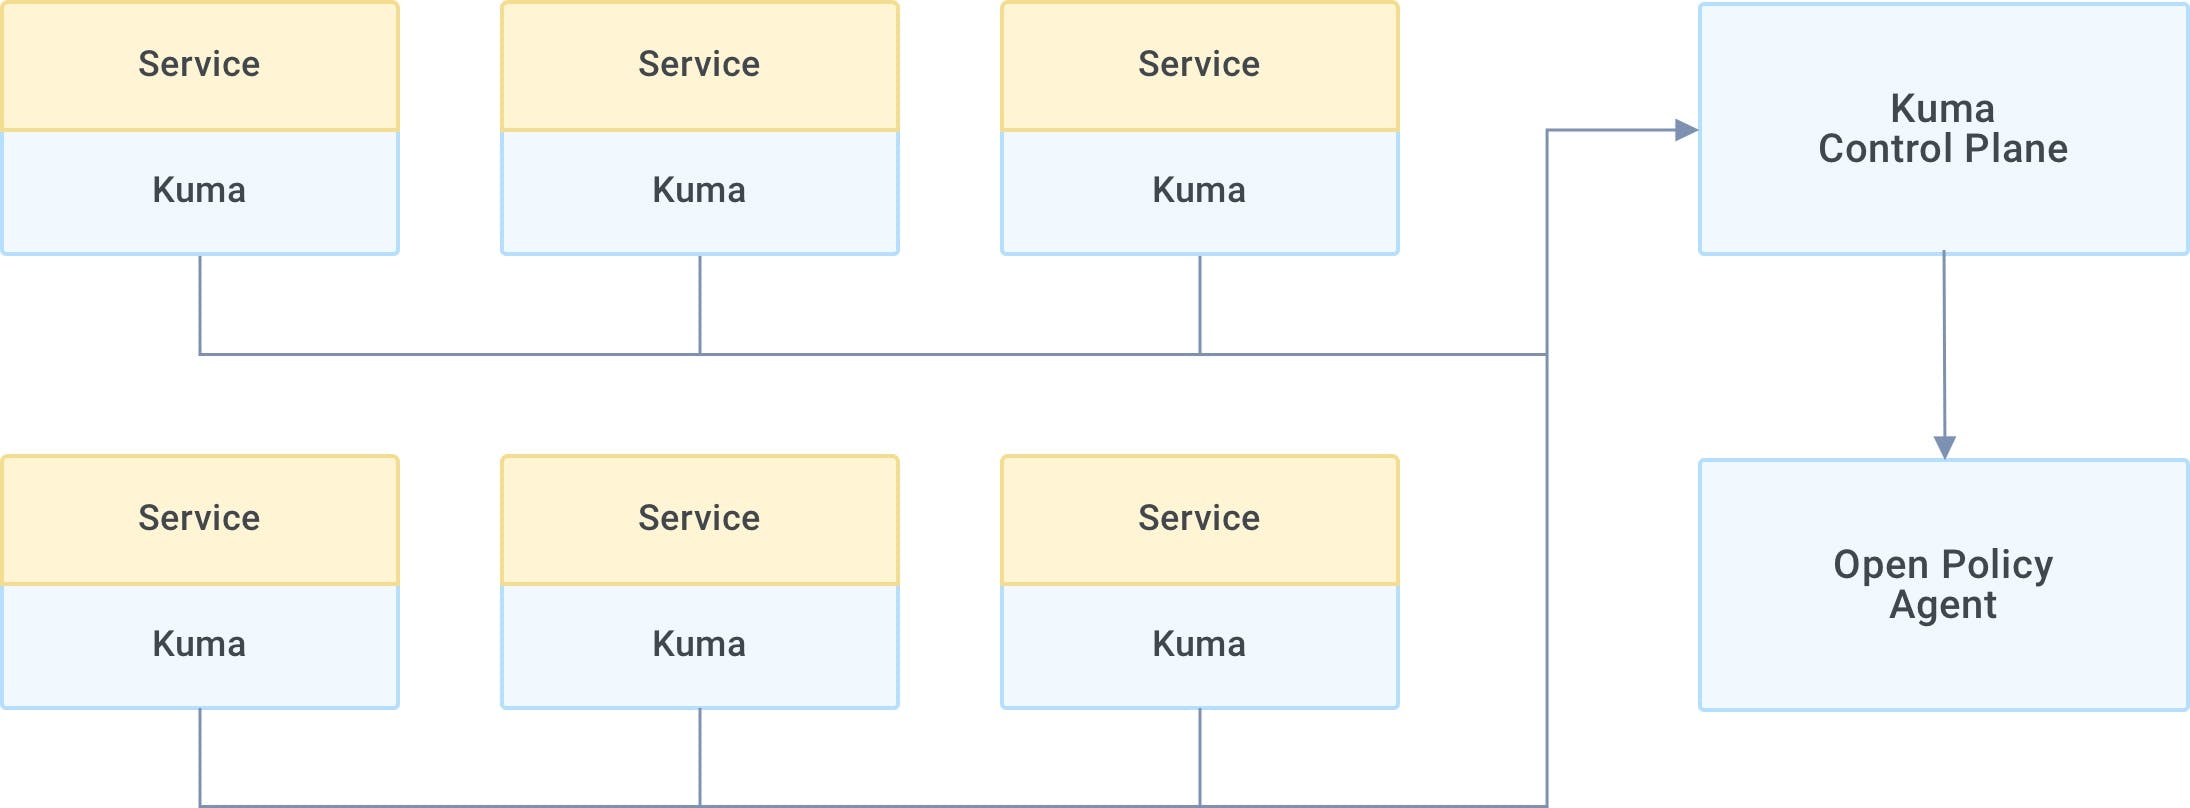 MS3 Tavros Zero-Trust Security with Kuma Service Mesh and Open Policy Agent (OPA)